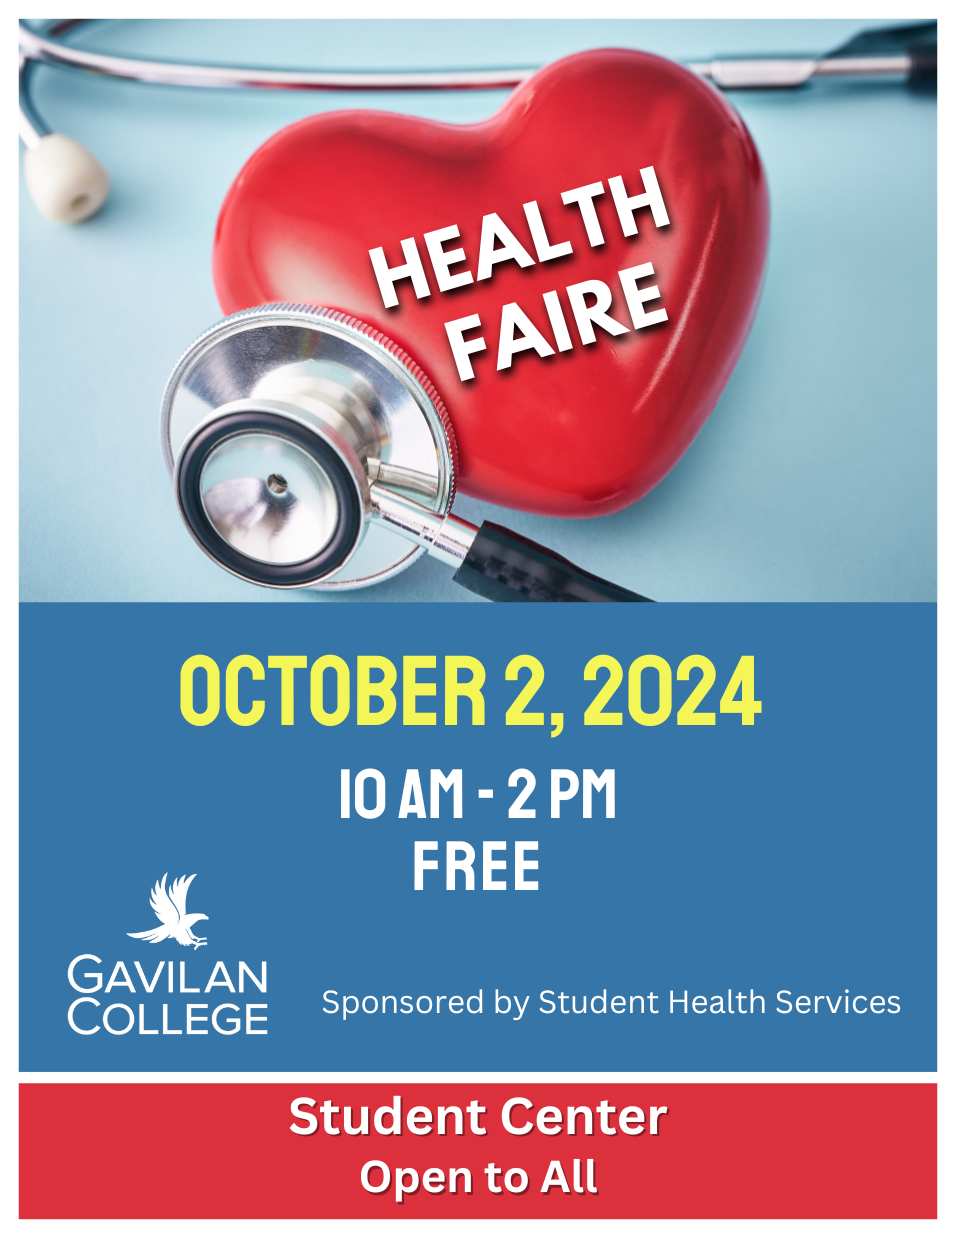 Health Faire image with information typed below and photo of a plastic heart and stethoscope on a blue background with a red stripe on the bottom